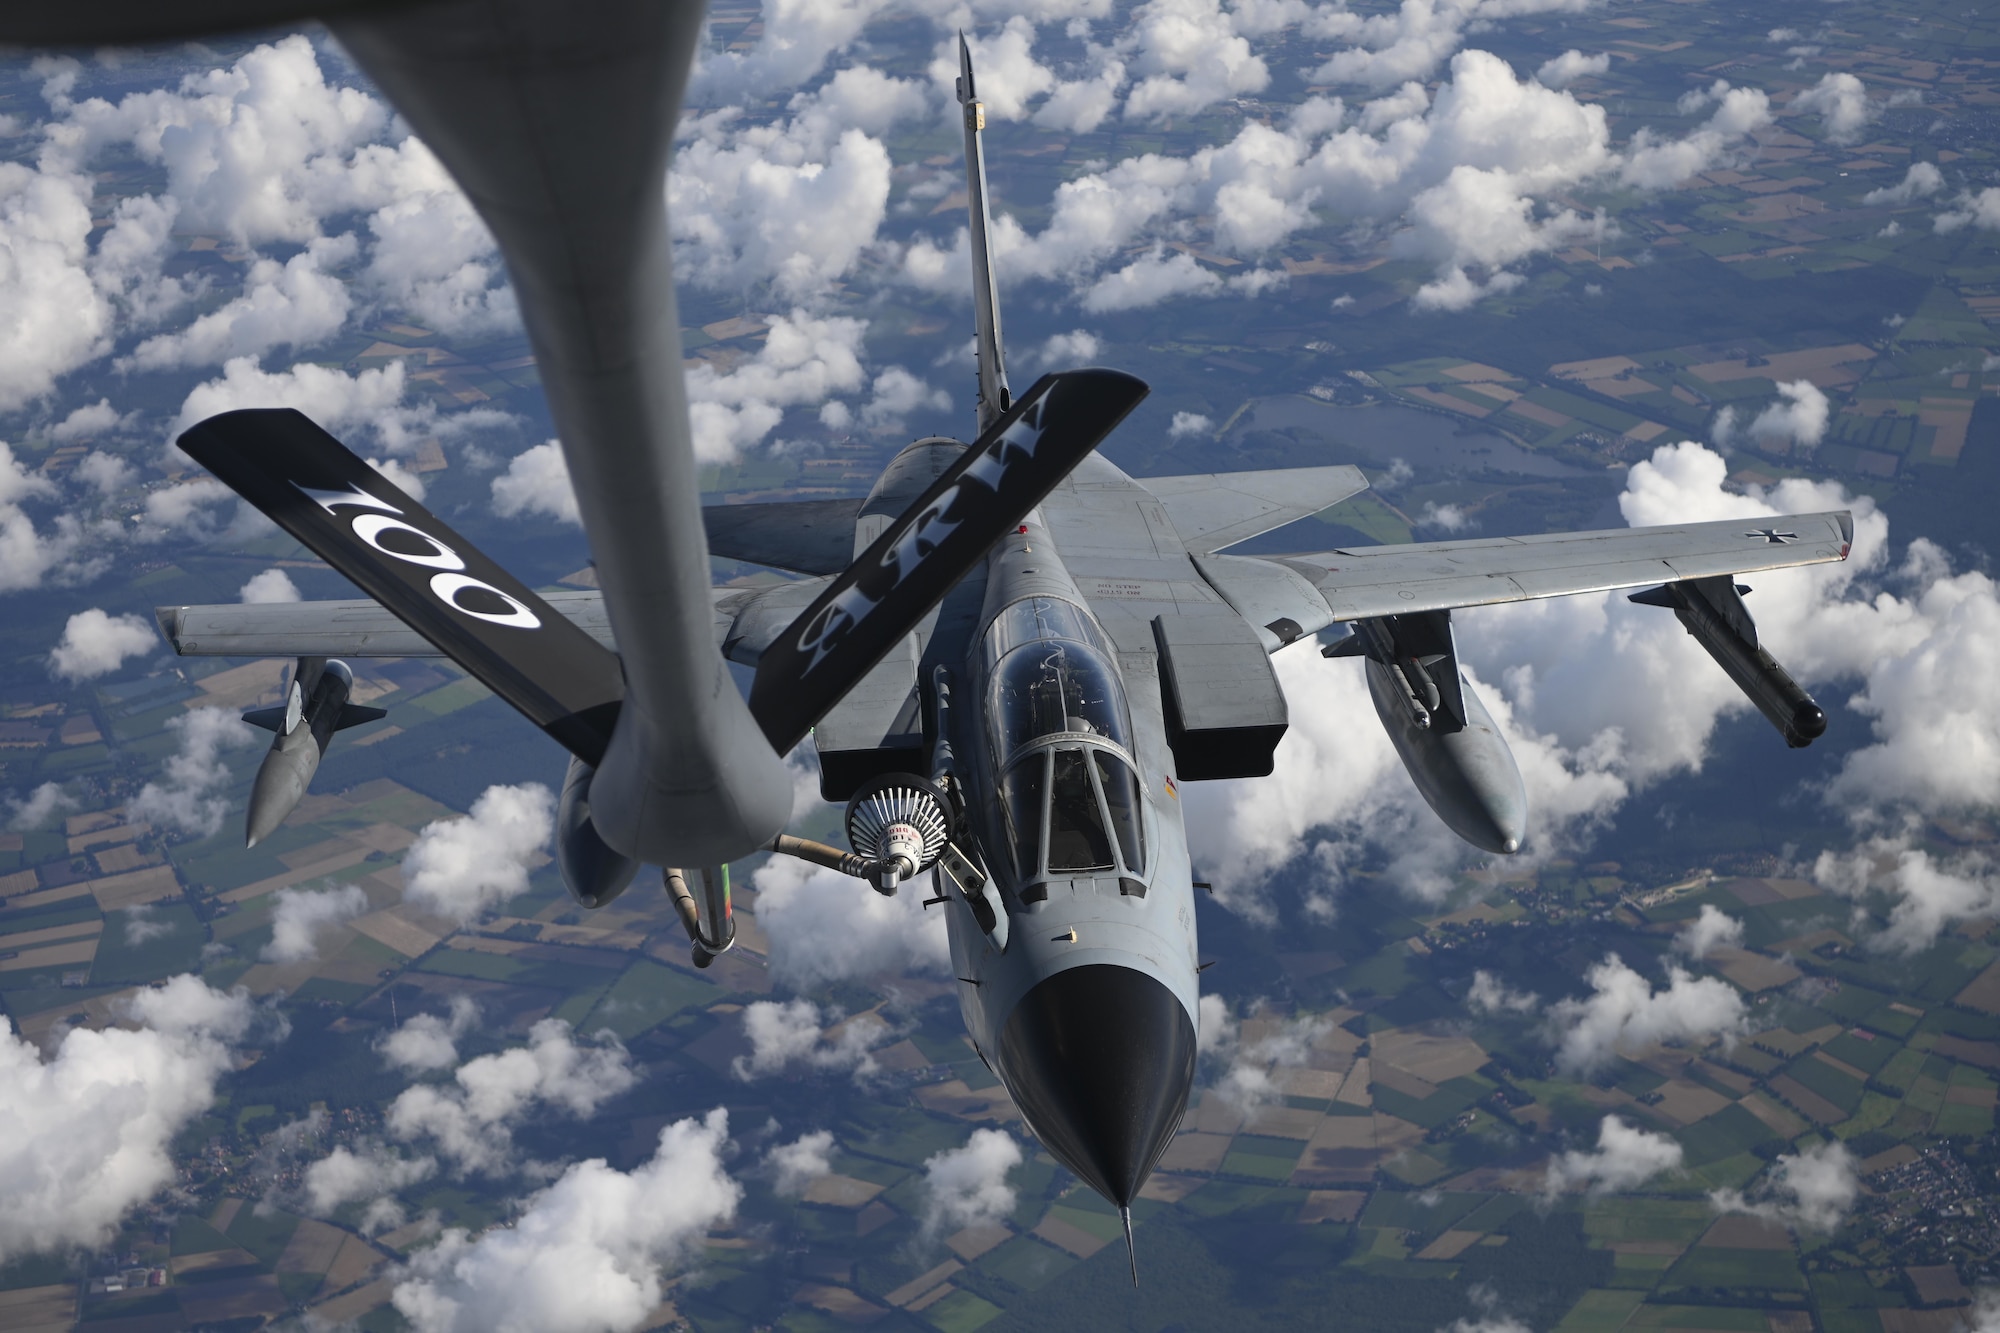 A German air force Tornado aircraft receives fuel from a U.S. Air Force KC-135 Stratotanker aircraft assigned to the 100th Air Refueling Wing, Royal Air Force Mildenhall, England, over Germany Aug. 2, 2021. Training with allies improves the readiness of U.S. forces to respond to aggression within Europe. (U.S. Air Force photo by Senior Airman Joseph Barron)